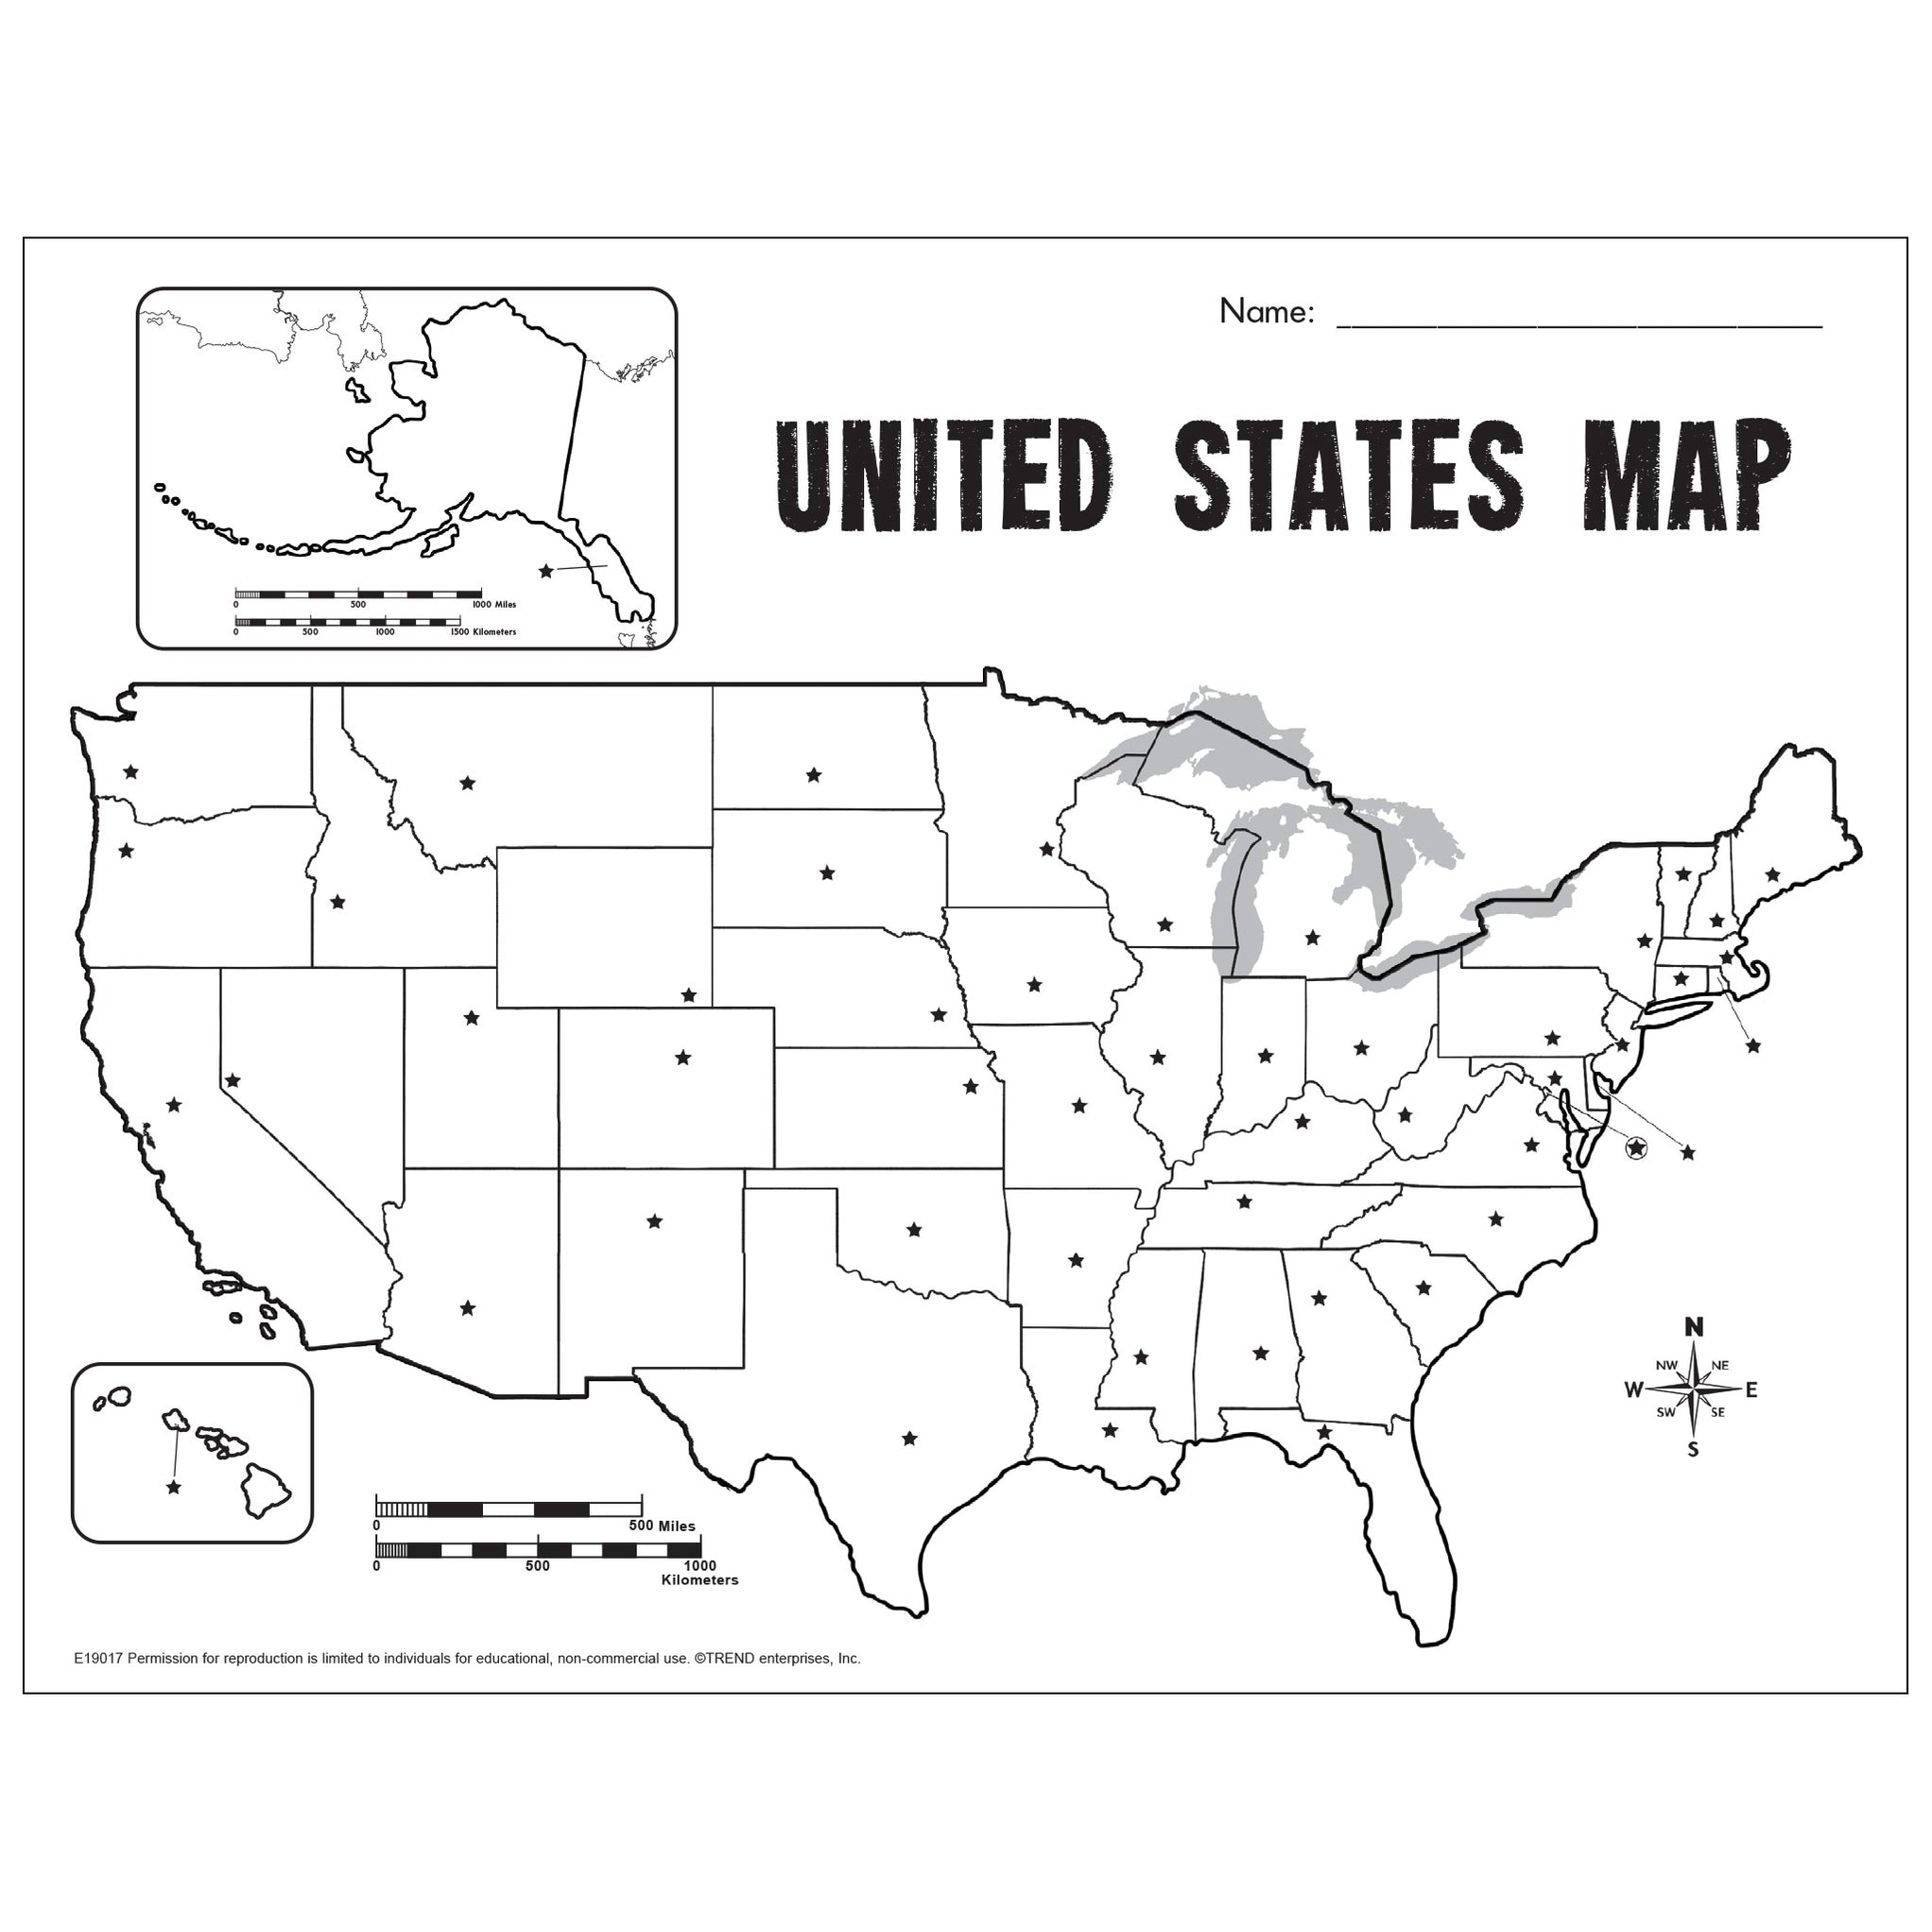 United States Map Blank Project Sheet Free Printable Trend — Trend Enterprises Inc 3257